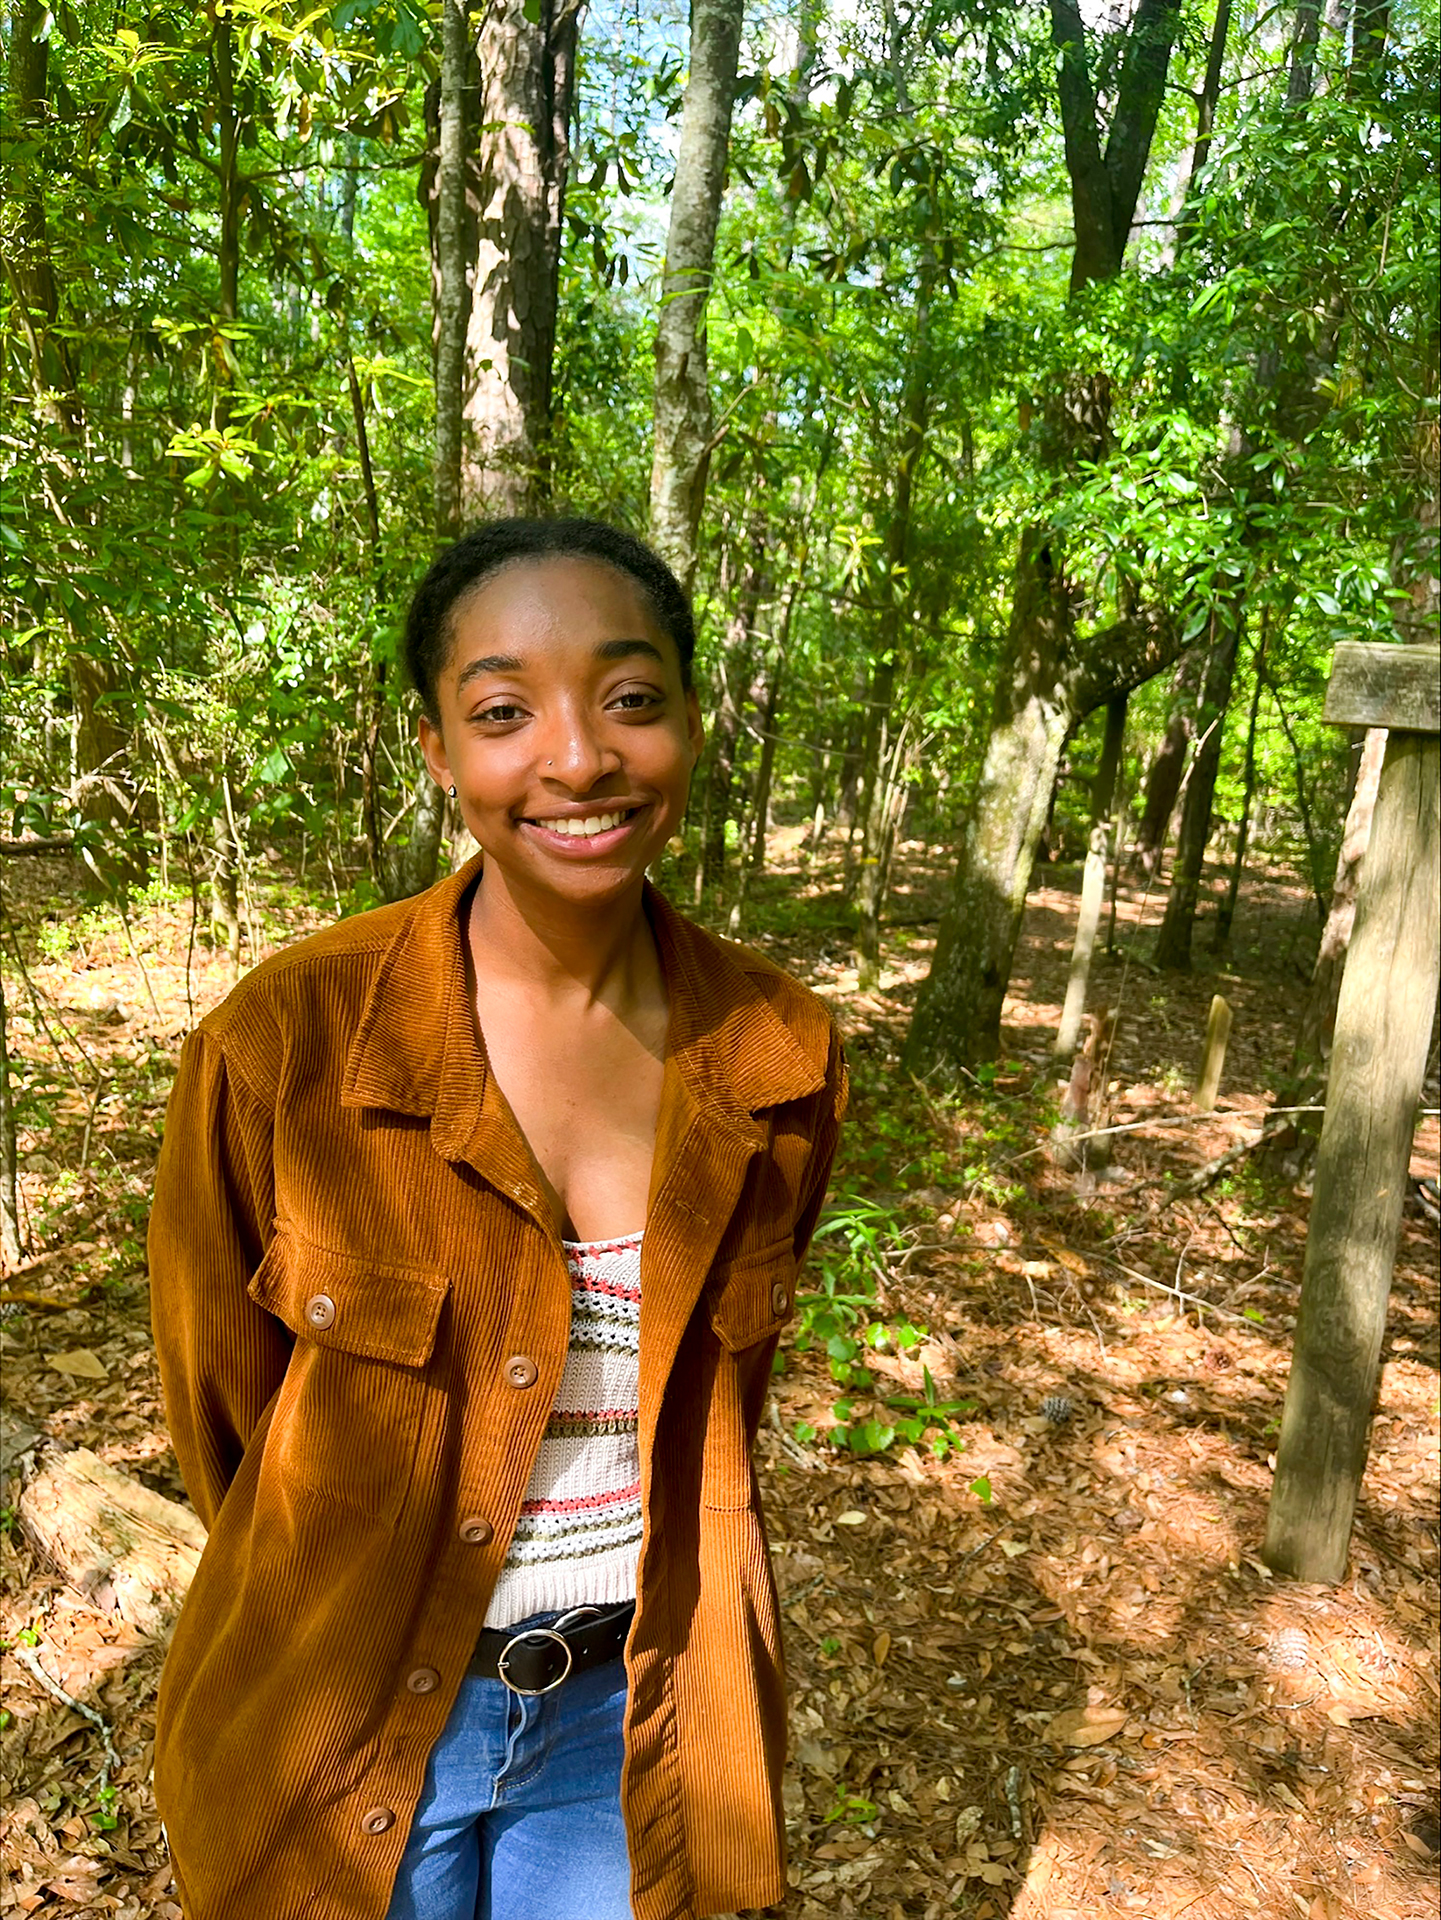 Portrait photo of Jameia Boone surrounded by trees and greenery in the forest.